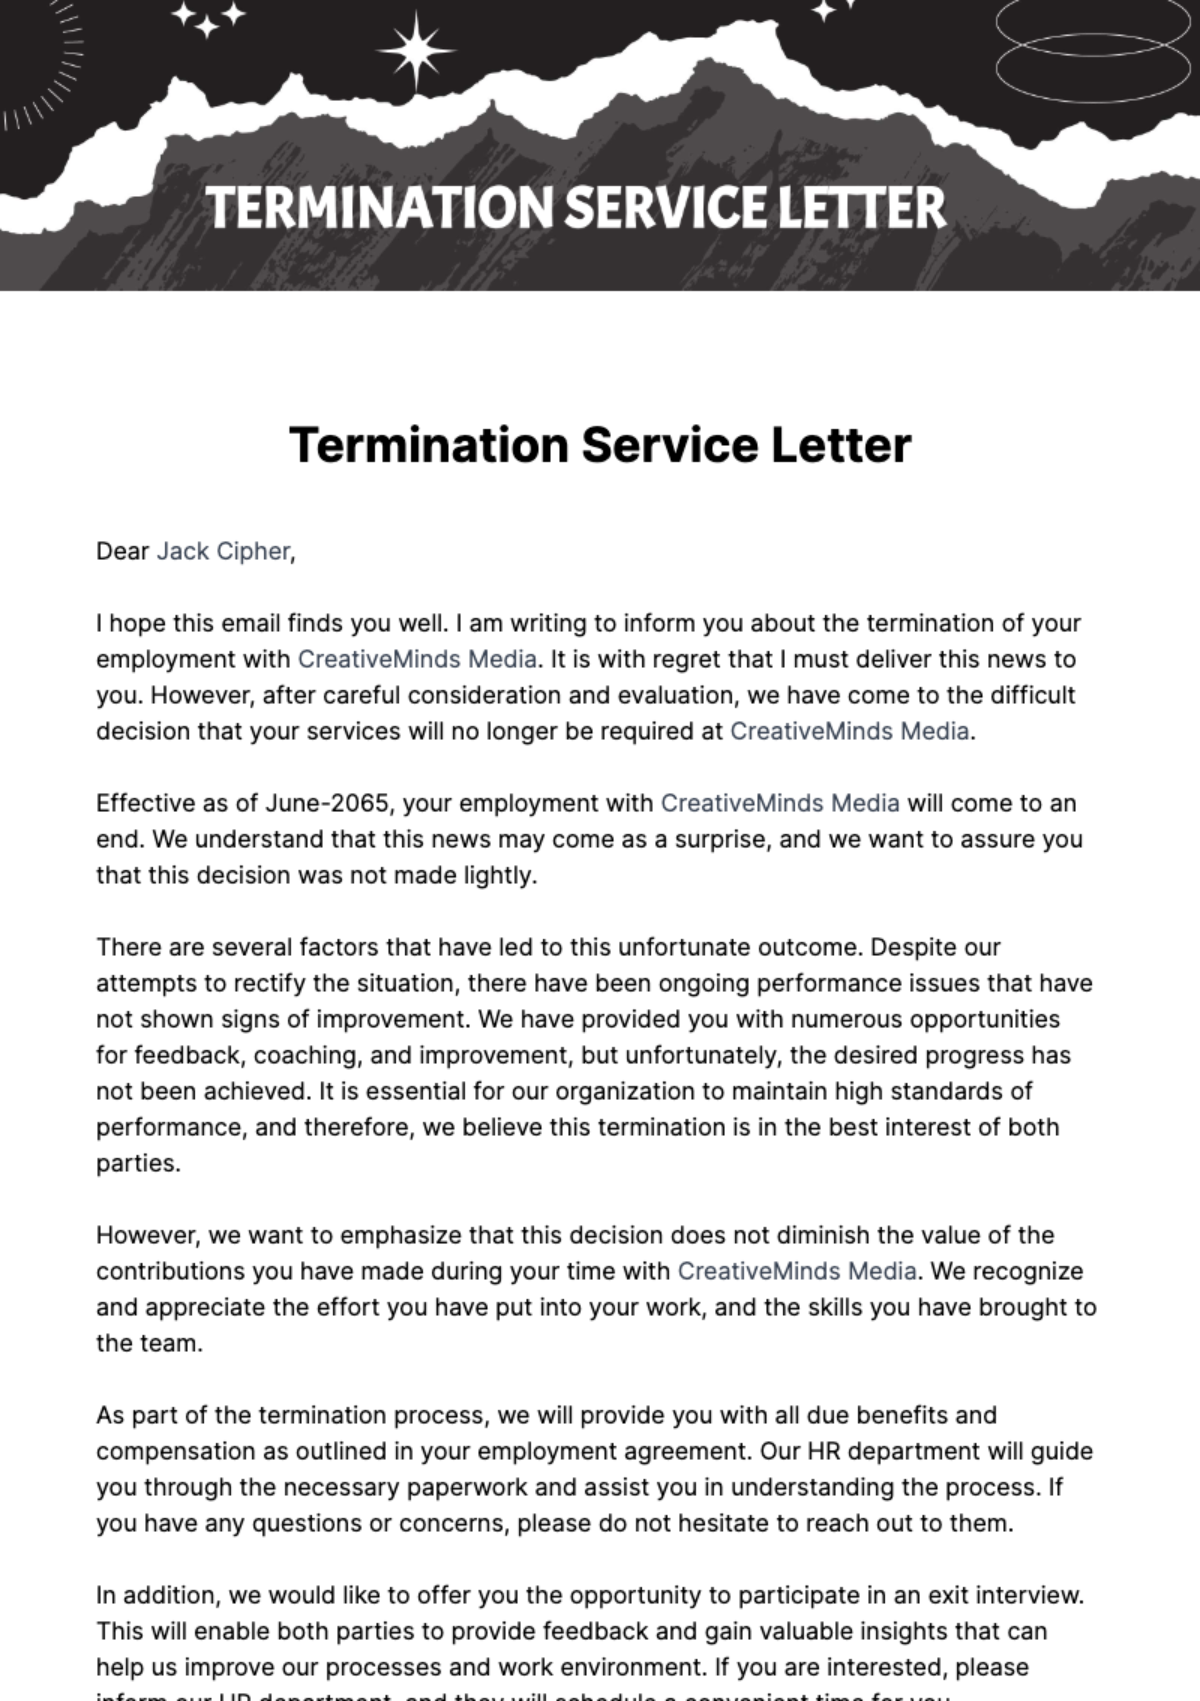 Free Termination Service Letter Template